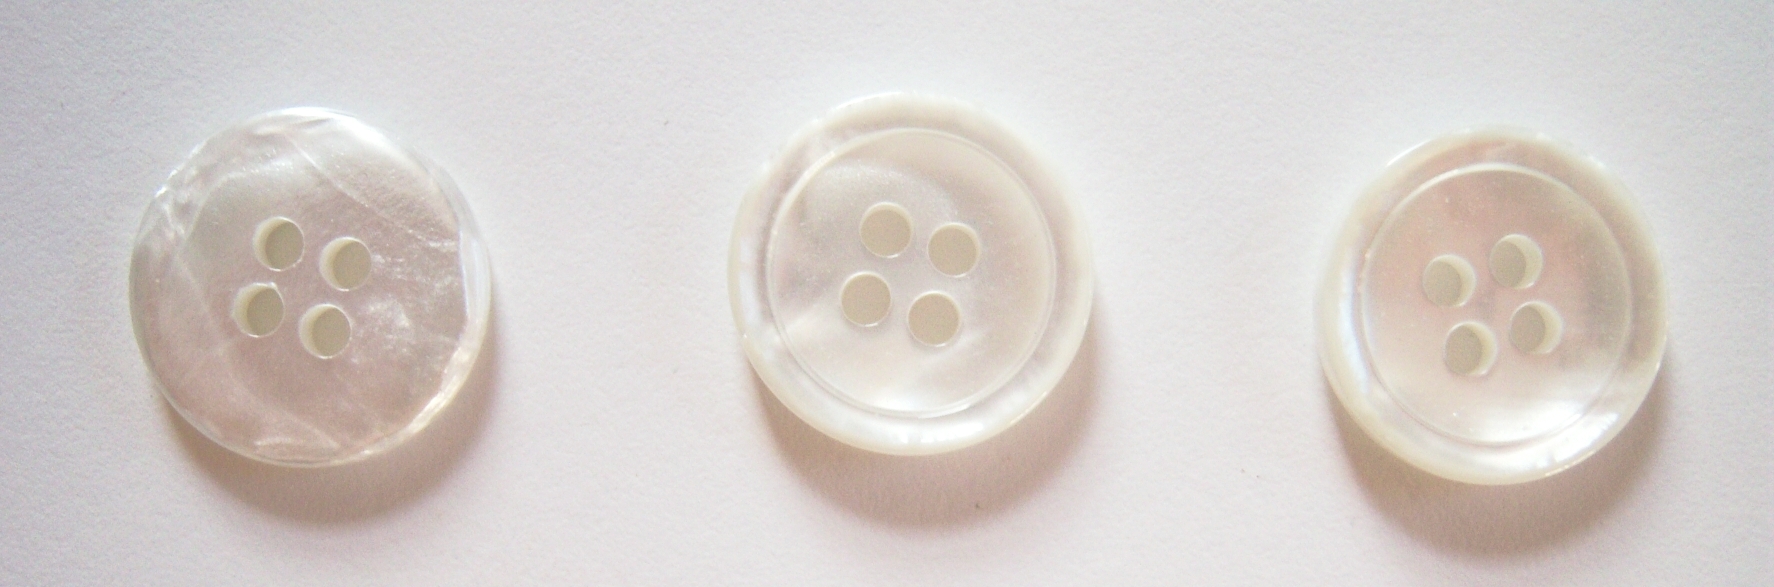 White Pearlized 3/4" 4 Hole Button